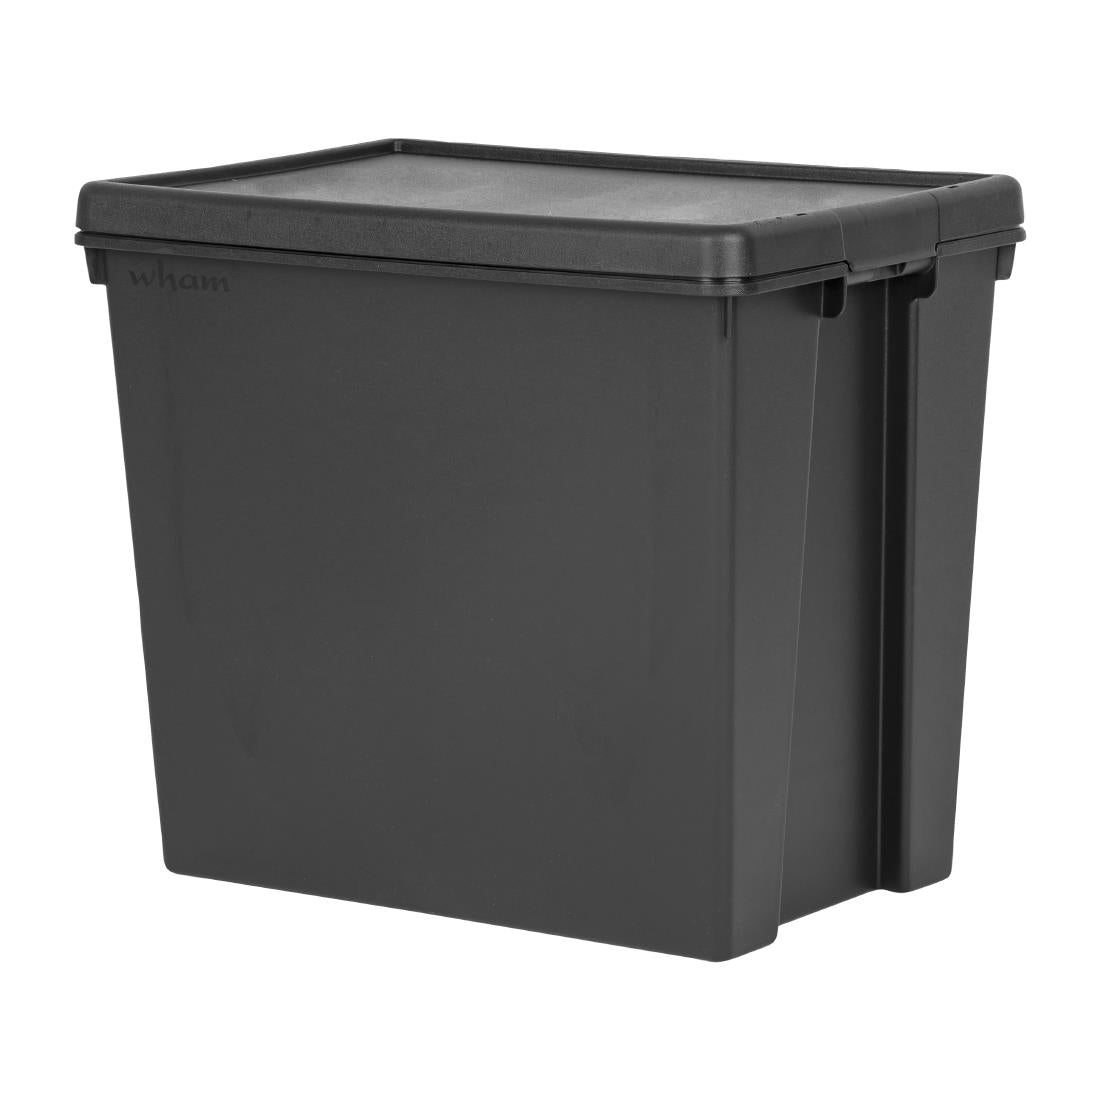 CX095 Wham Bam Recycled Storage Box & Lid Black 92Ltr JD Catering Equipment Solutions Ltd